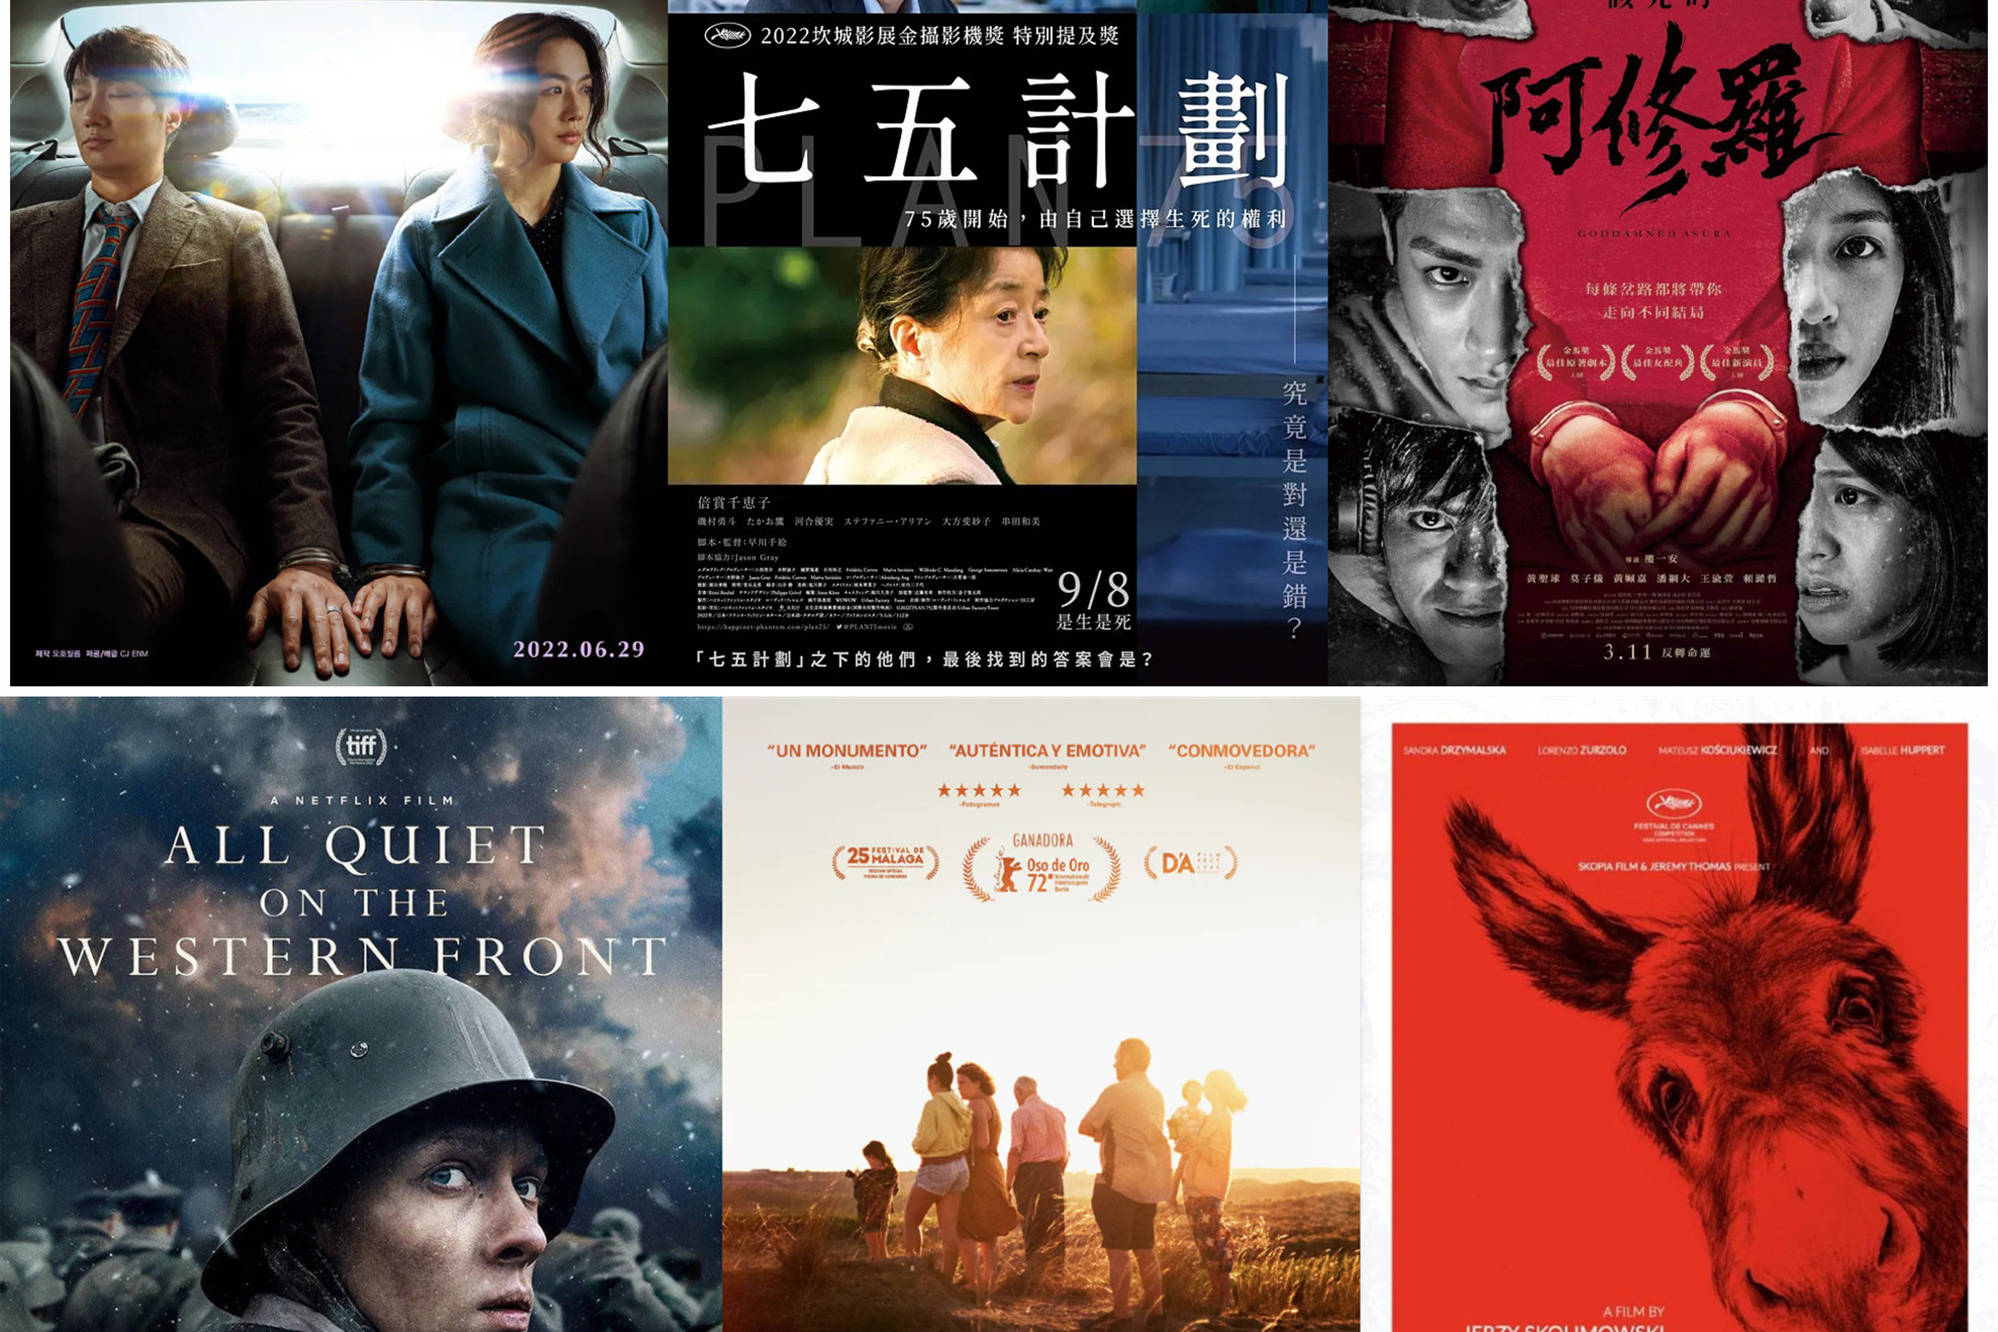 The list of best international films selected by countries and regions